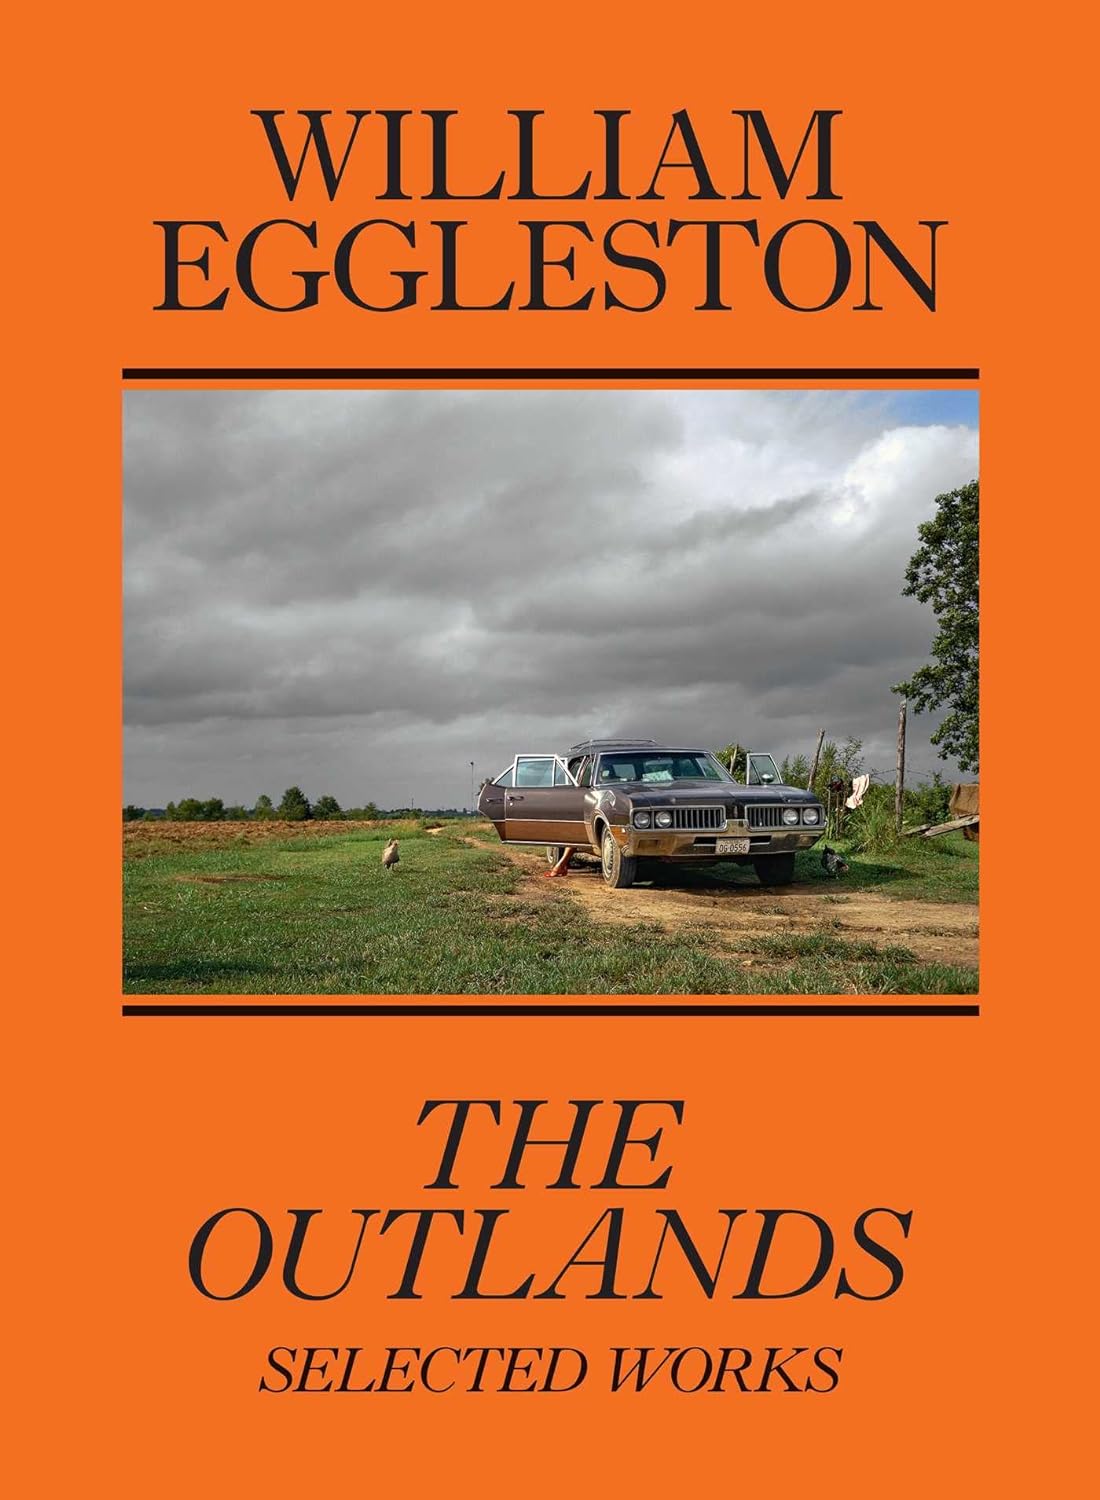 jasper johns pictures within pictures 1980 2015 William Eggleston: The Outlands, Selected Works